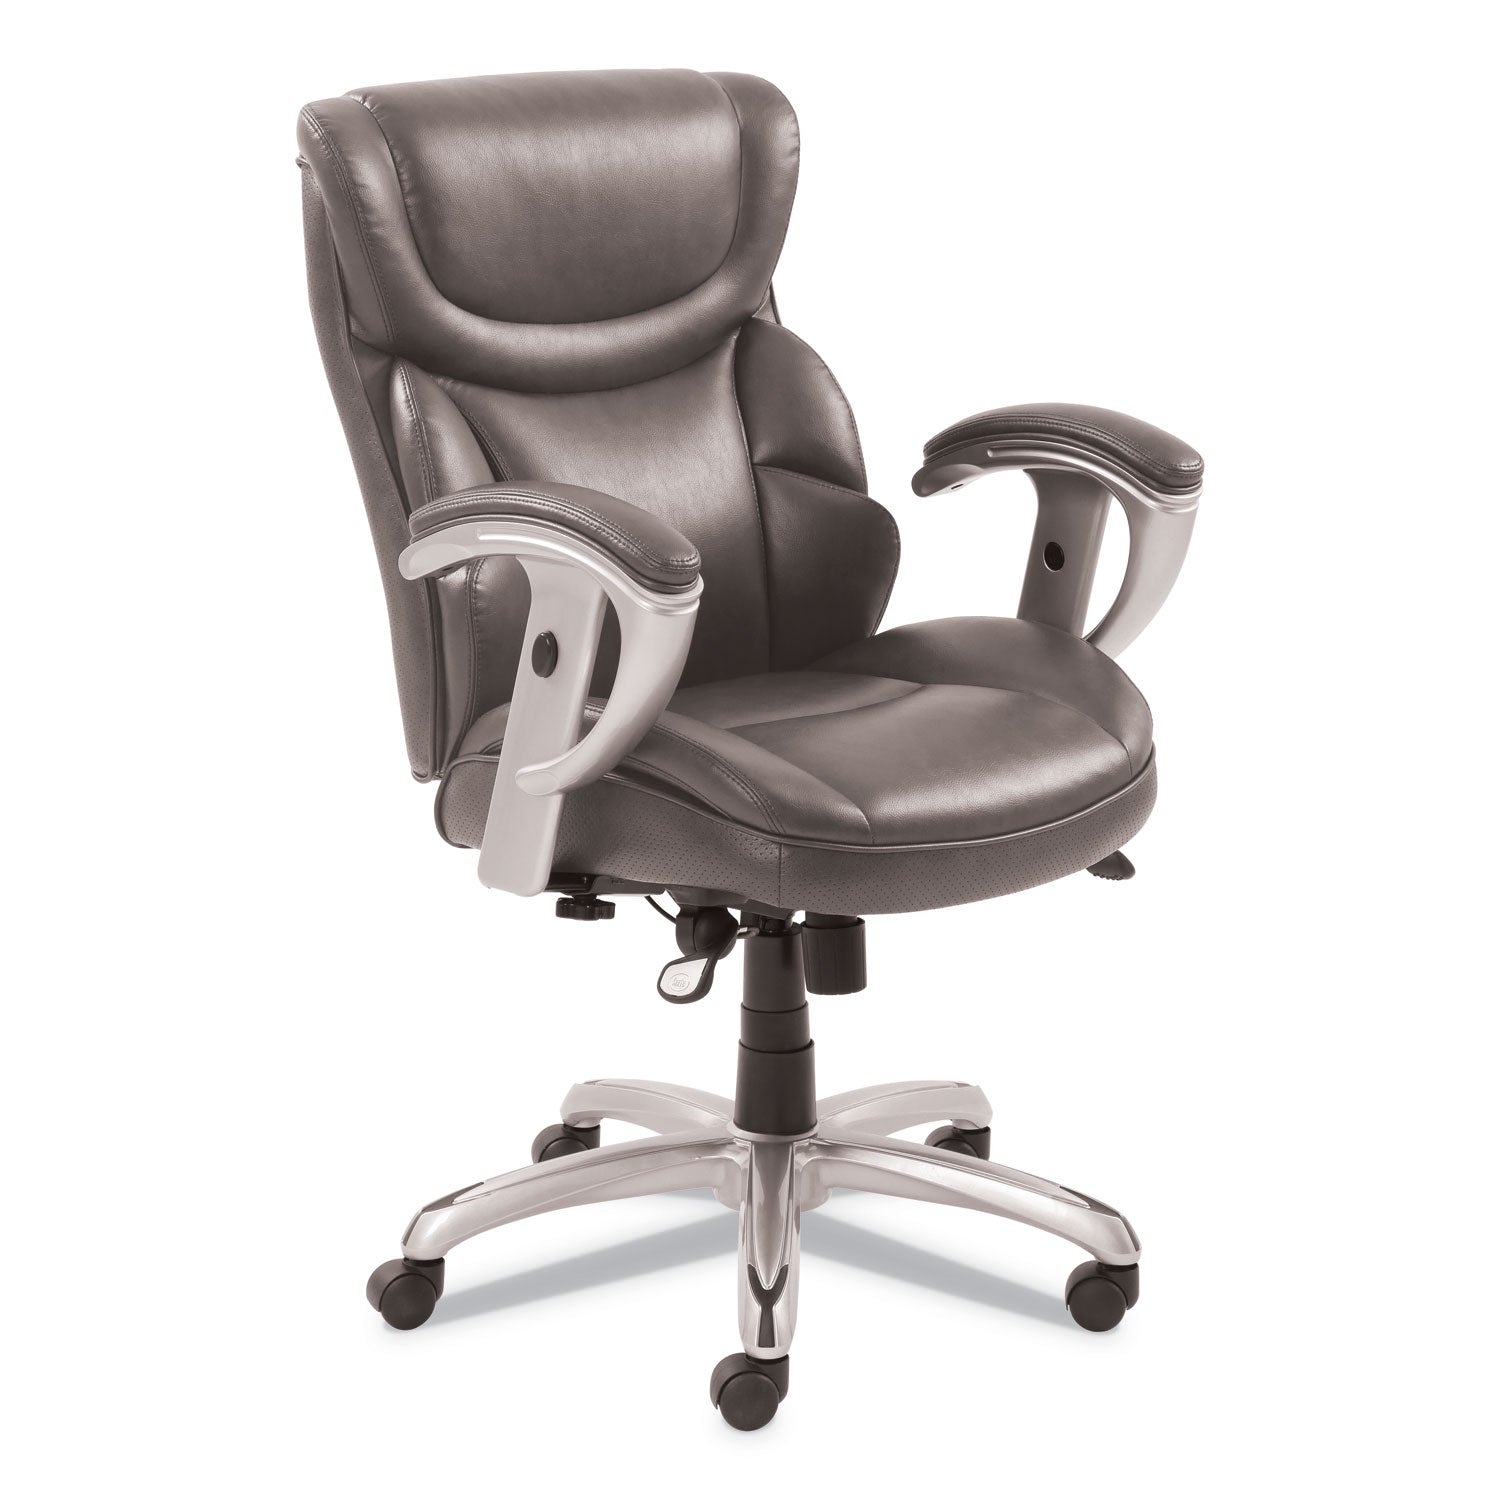 emerson-task-chair-supports-up-to-300-lb-1875-to-2175-seat-height-gray-seat-back-silver-base_srj49711gry - 1